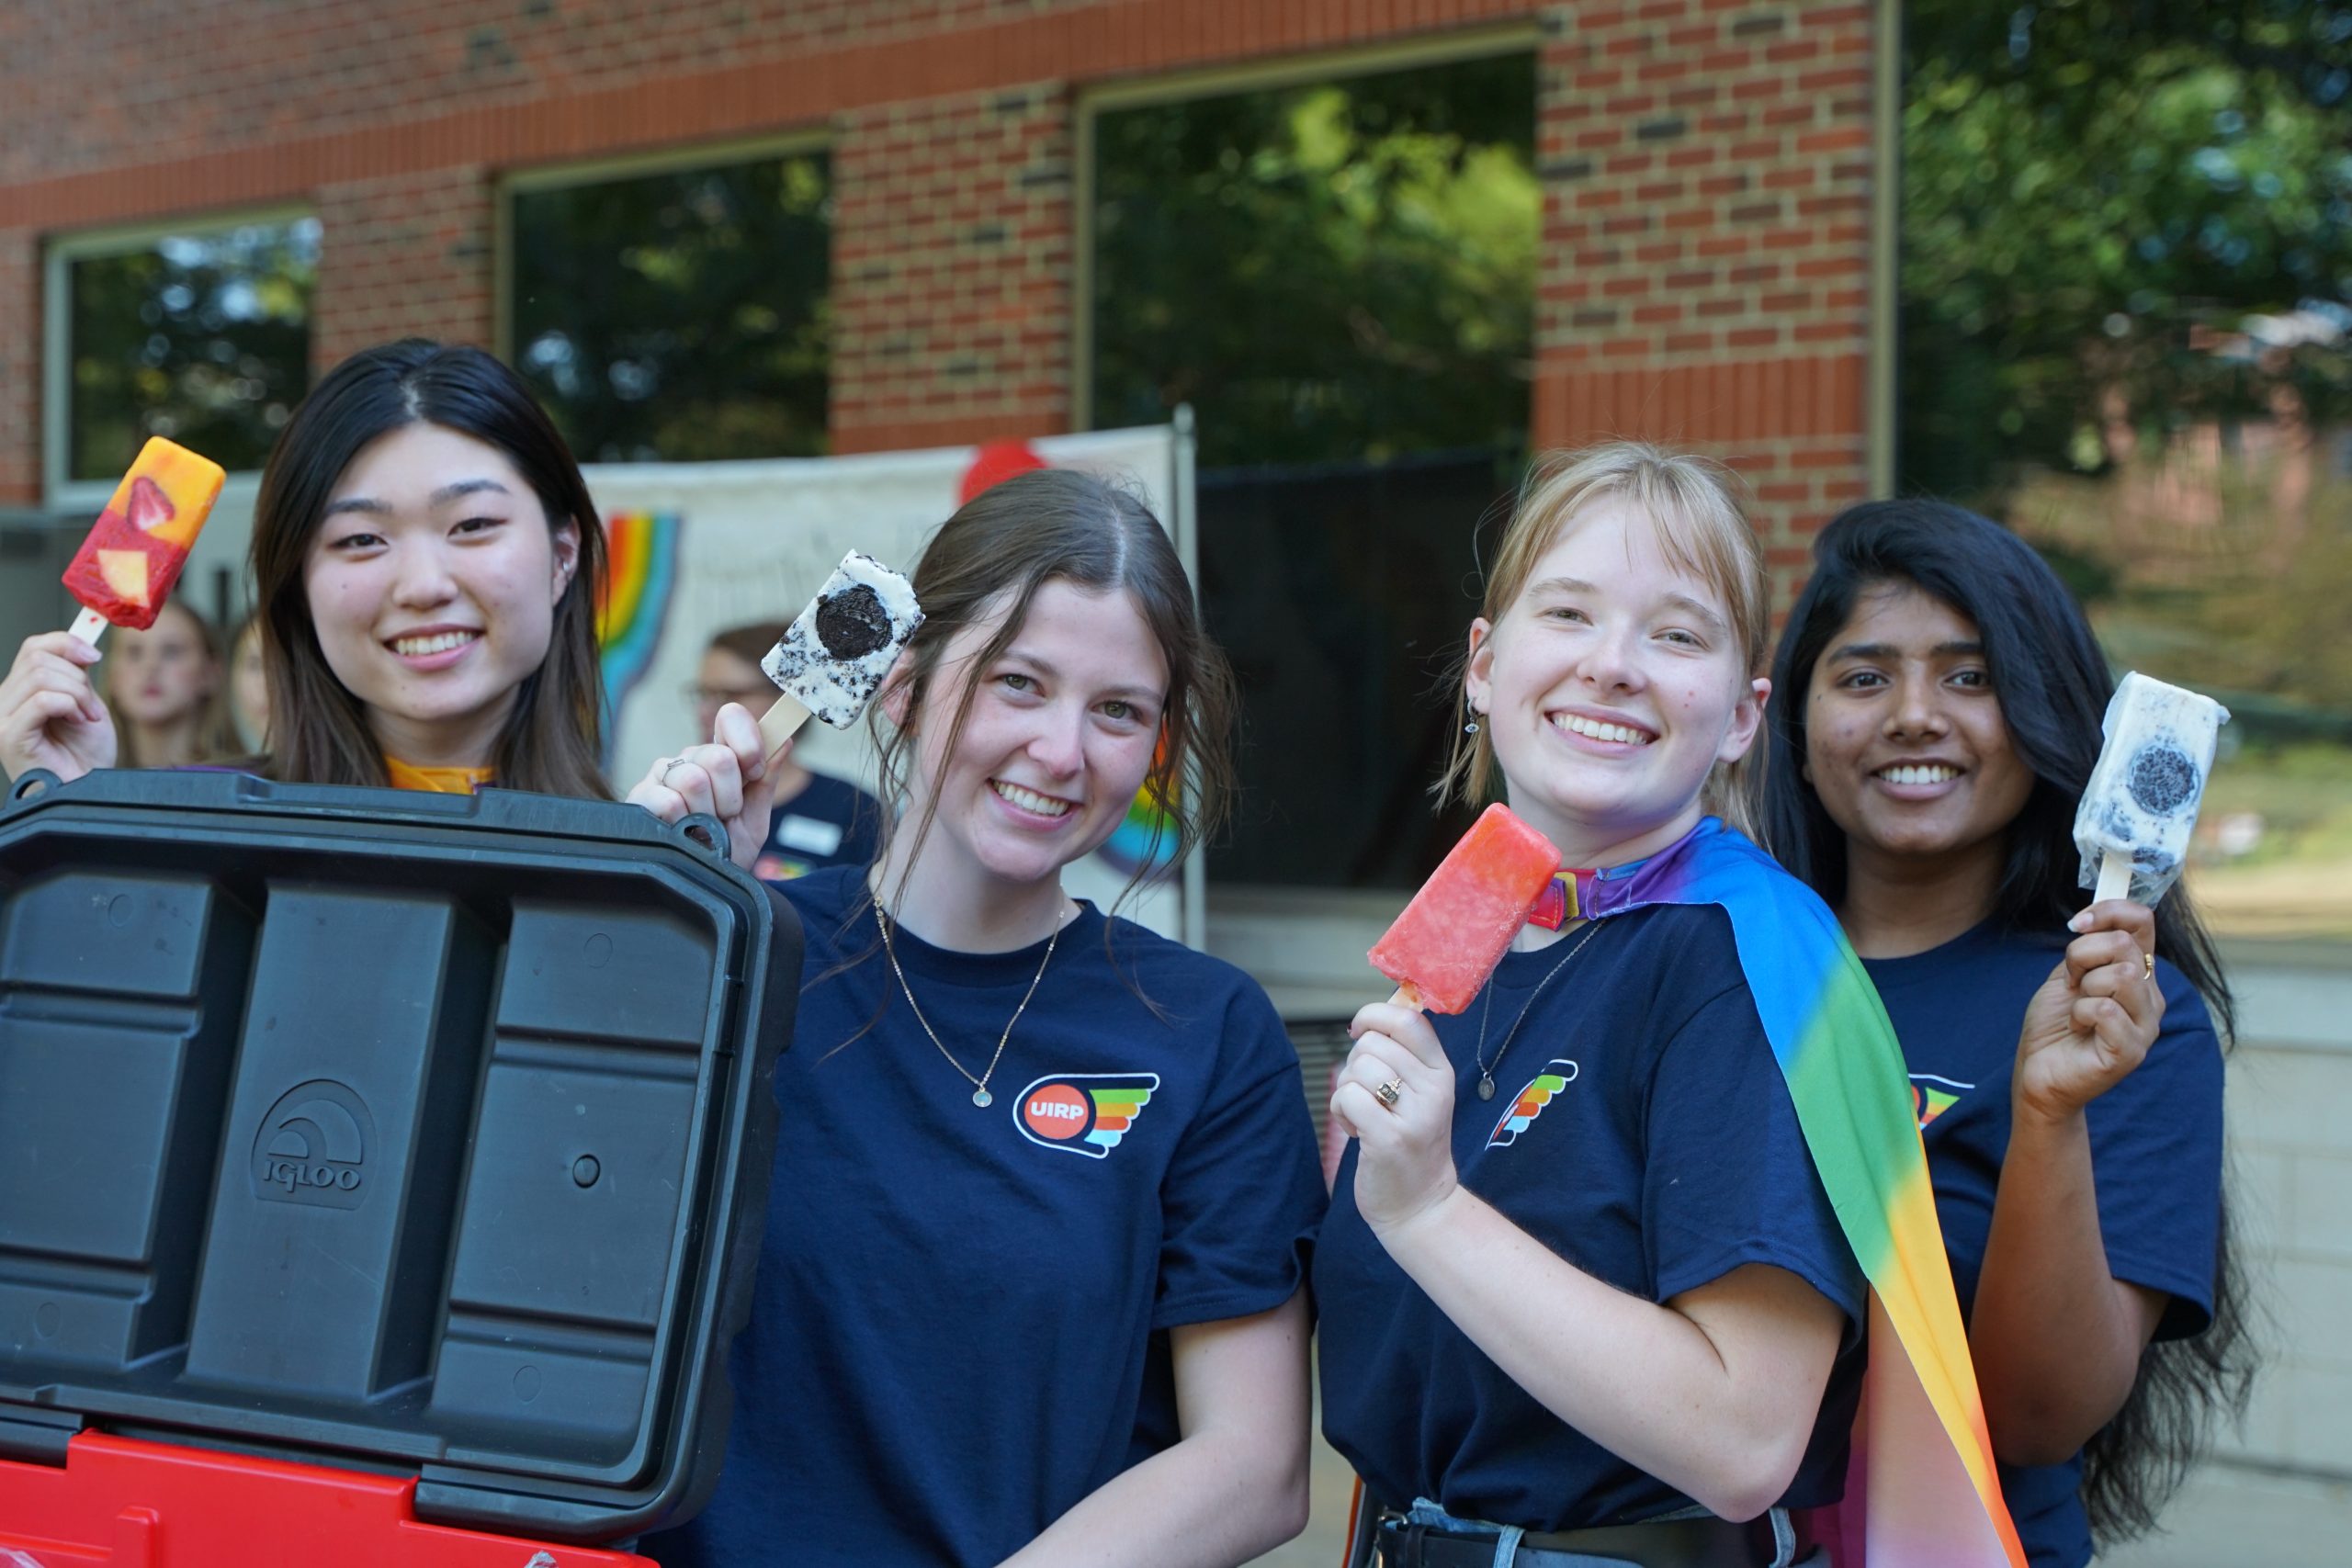 Fire @ Five June 2022: Research Park interns enjoying Pride in the Park